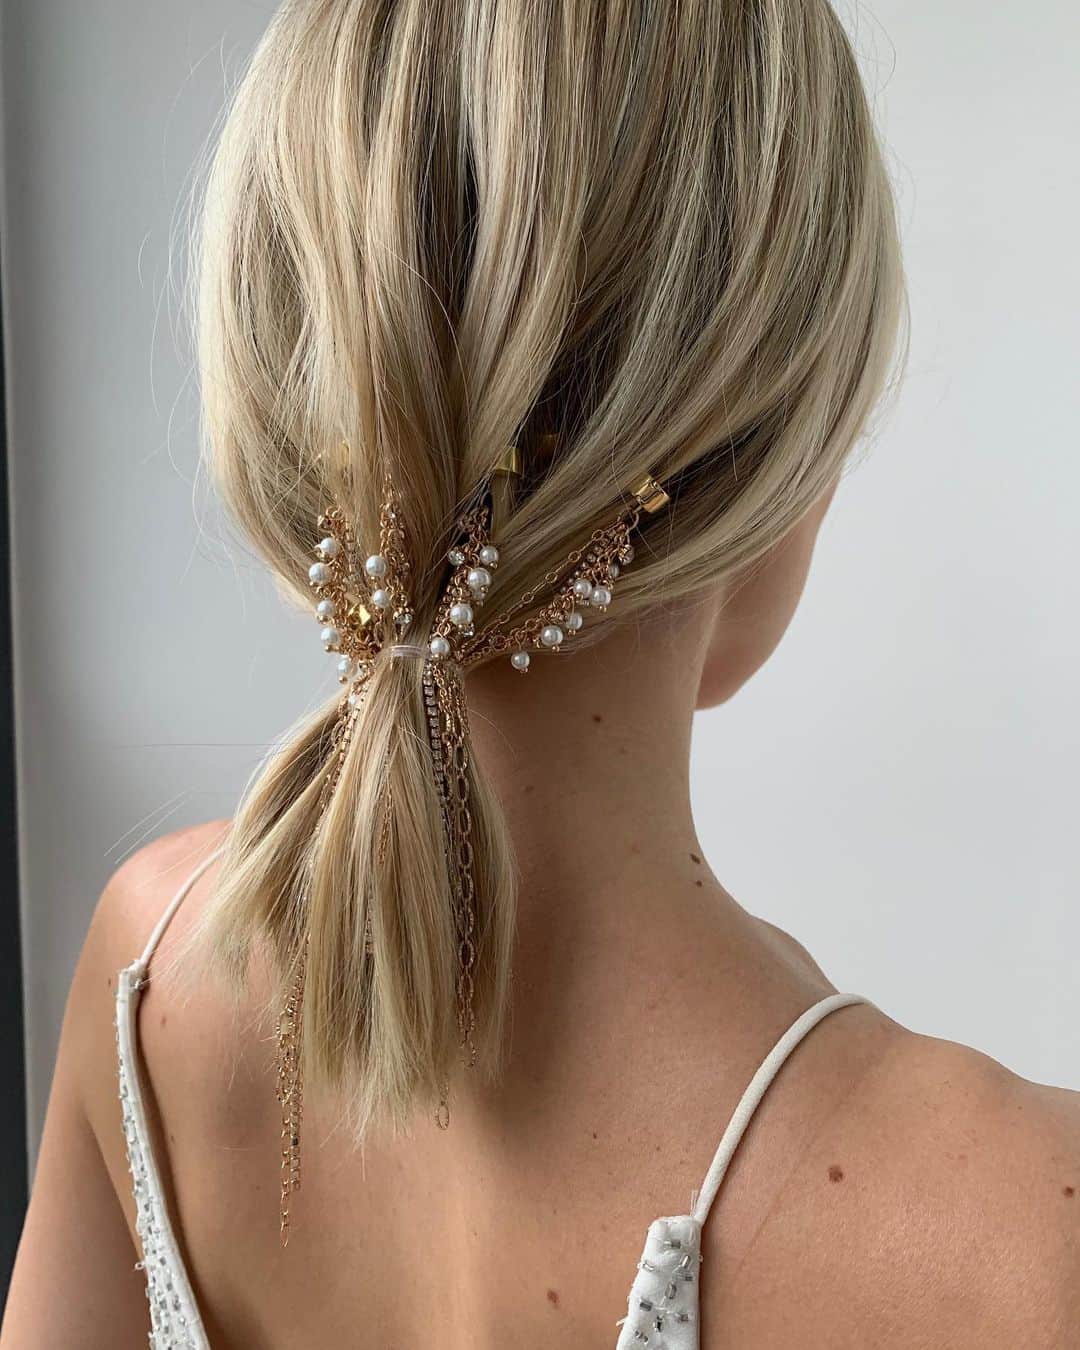 Mollie Kingのインスタグラム：「My presents might not be wrapped but at least my Christmas hairstyle is sorted! 🤣 #hairstyles #blondehair #ponytail」